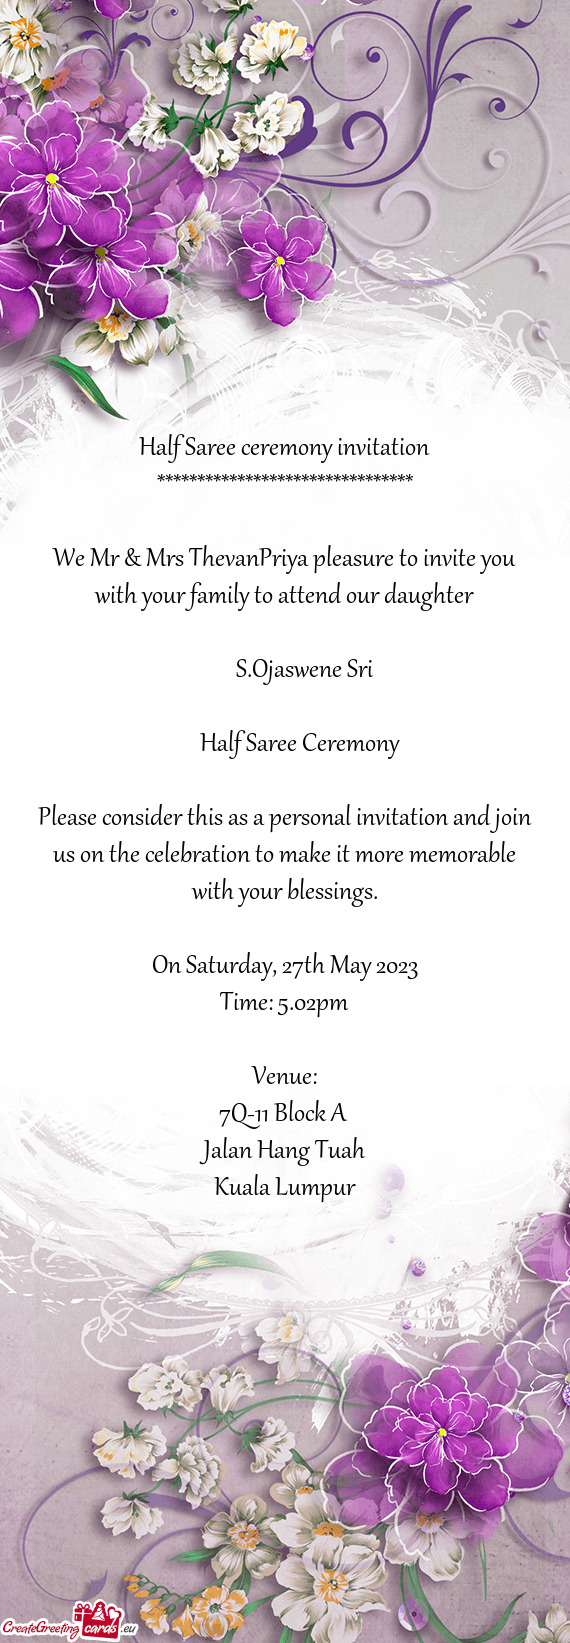 We Mr & Mrs ThevanPriya pleasure to invite you with your family to attend our daughter